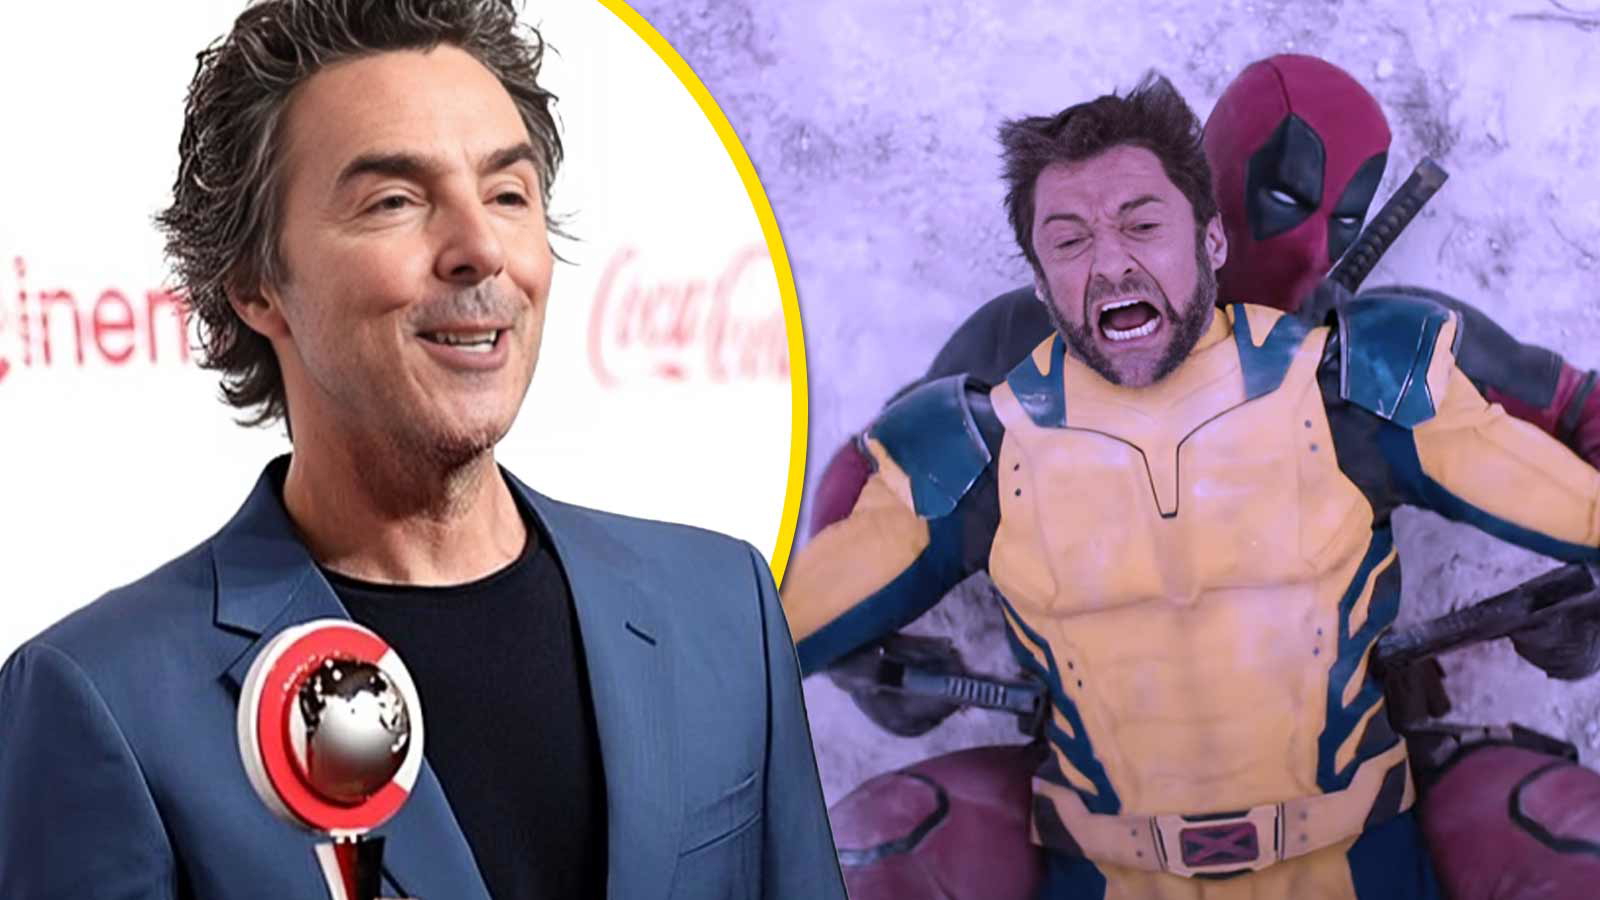 “It allows me to not think about the stakes”: Shawn Levy’s Honest Confession About Pressures of Making Deadpool & Wolverine Reveals How it Could Affect His Career